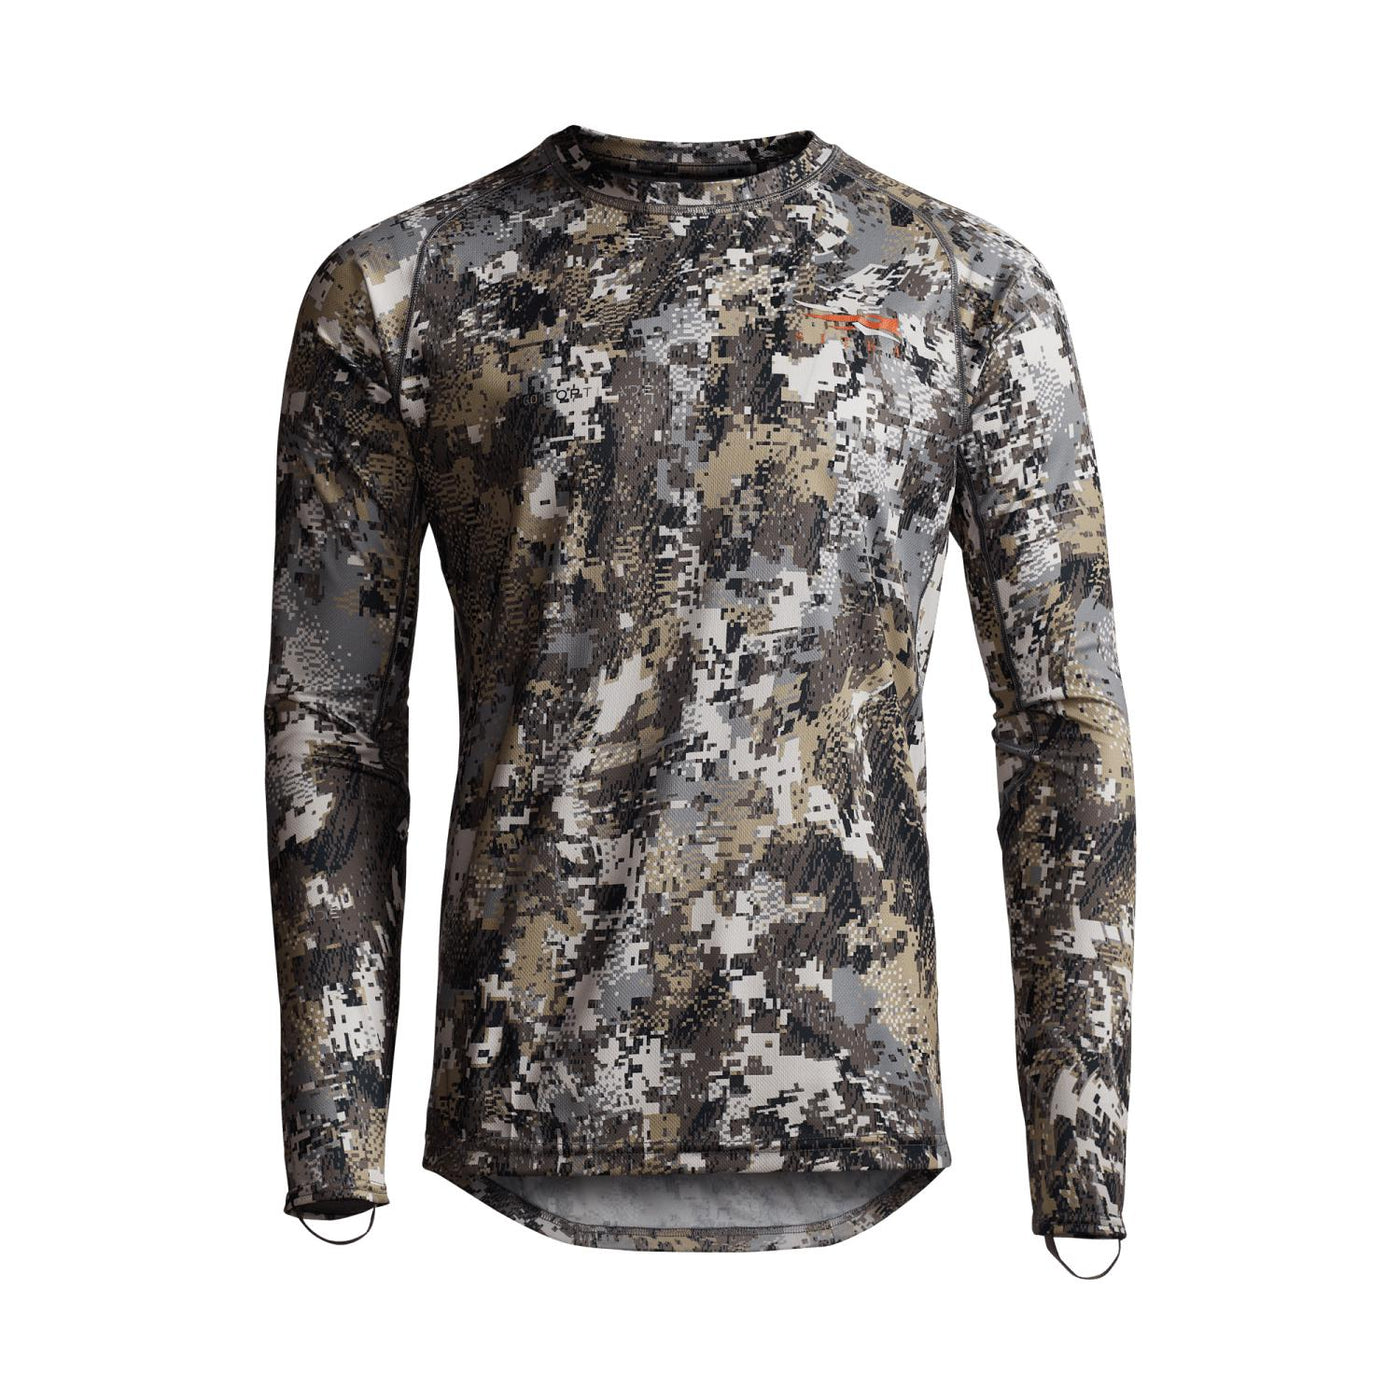 Sitka Core Lightweight Long Sleeve Crew-Men's Clothing-Elevated II-2XL-Kevin's Fine Outdoor Gear & Apparel